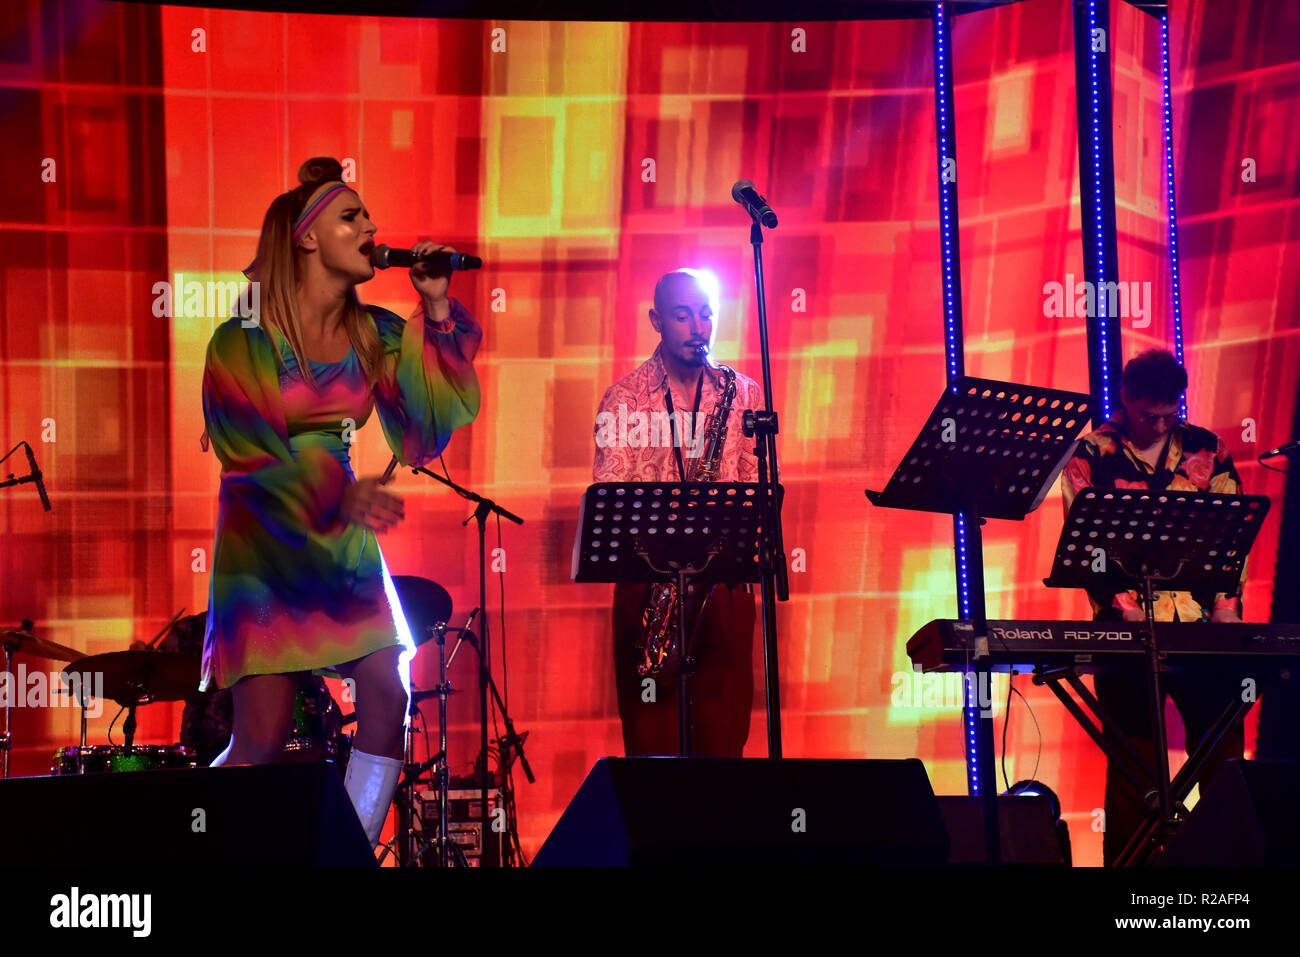 Mumbai, India. 17 November, 2018. The artists from Retro Band perform at Bluestar's Platinum Jubilee event at hotel JW Marriott Sahar in Mumbai. The Retro Band came from United Kingdom to perform 1st time in India. Azhar Khan/Alamy Live News Stock Photo